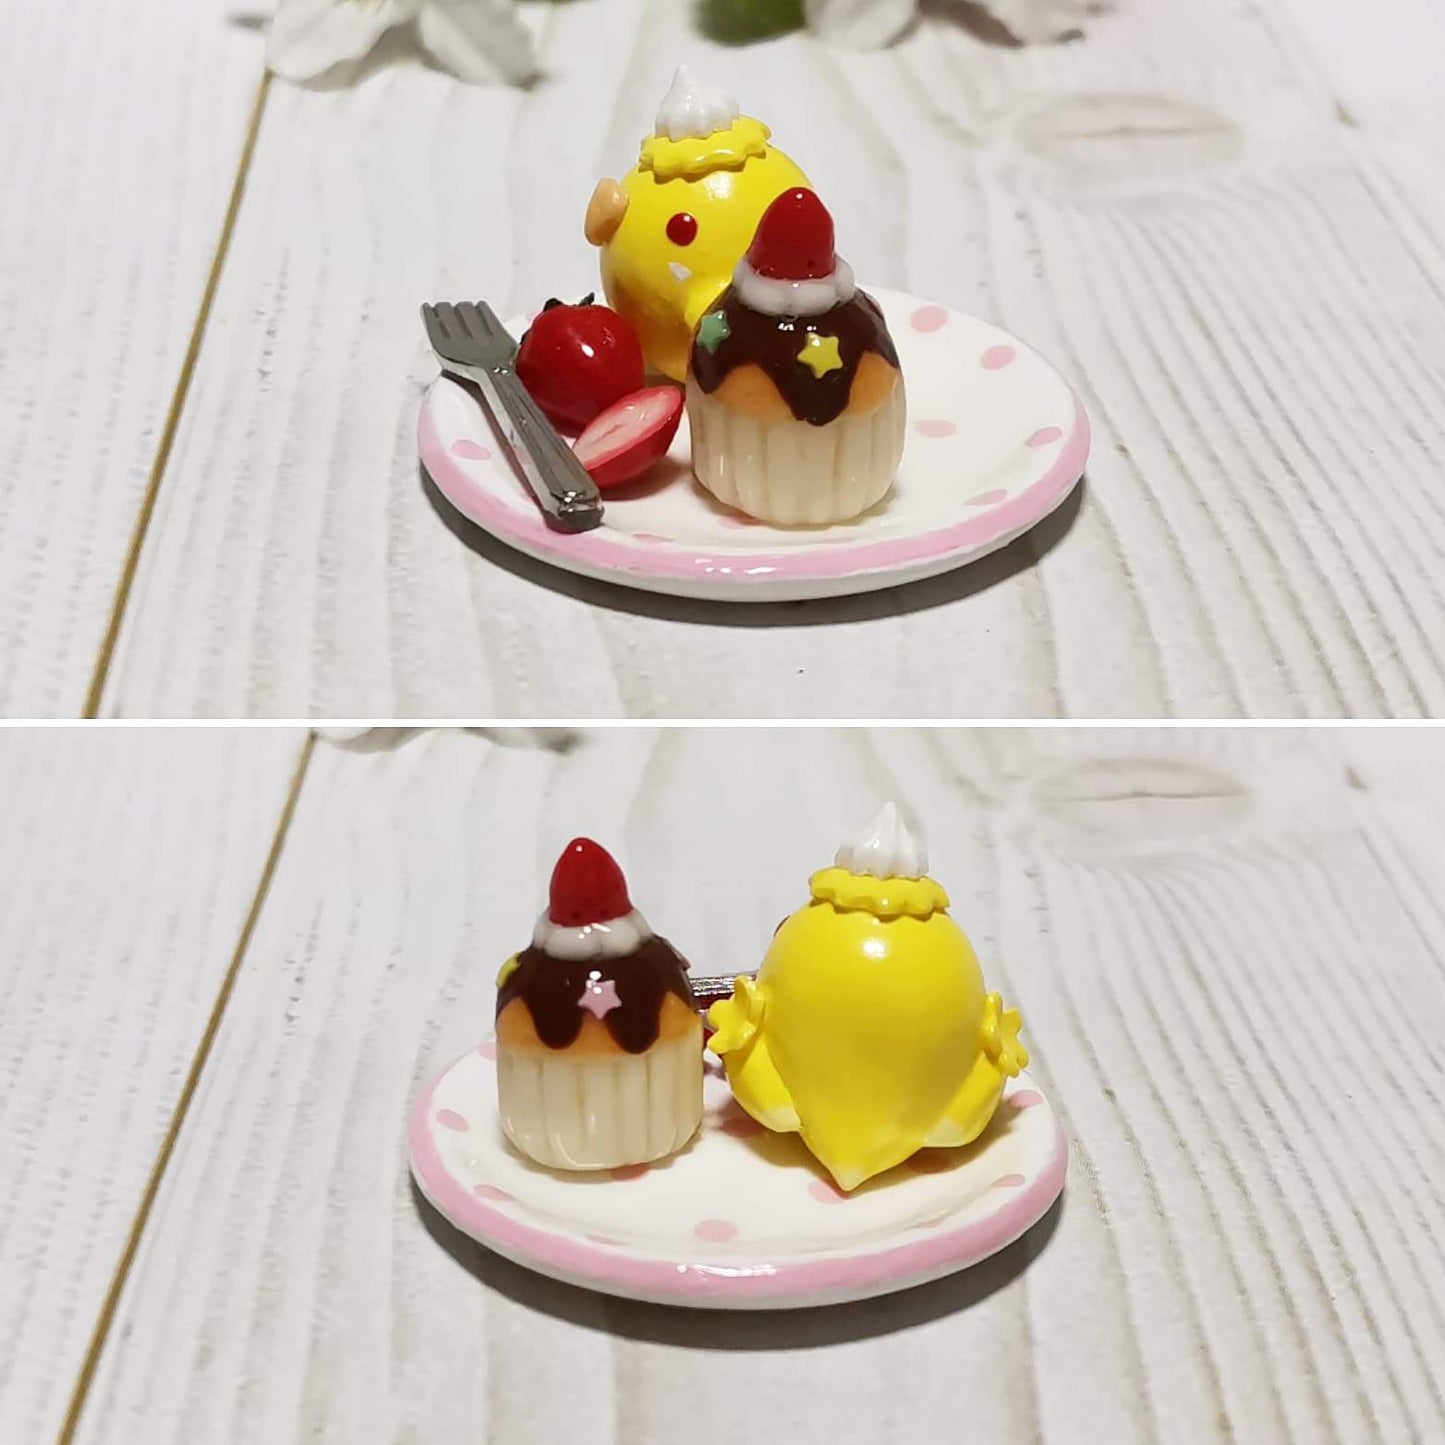 Miniature Japanese Crested Budgie with Strawberry Cupcake